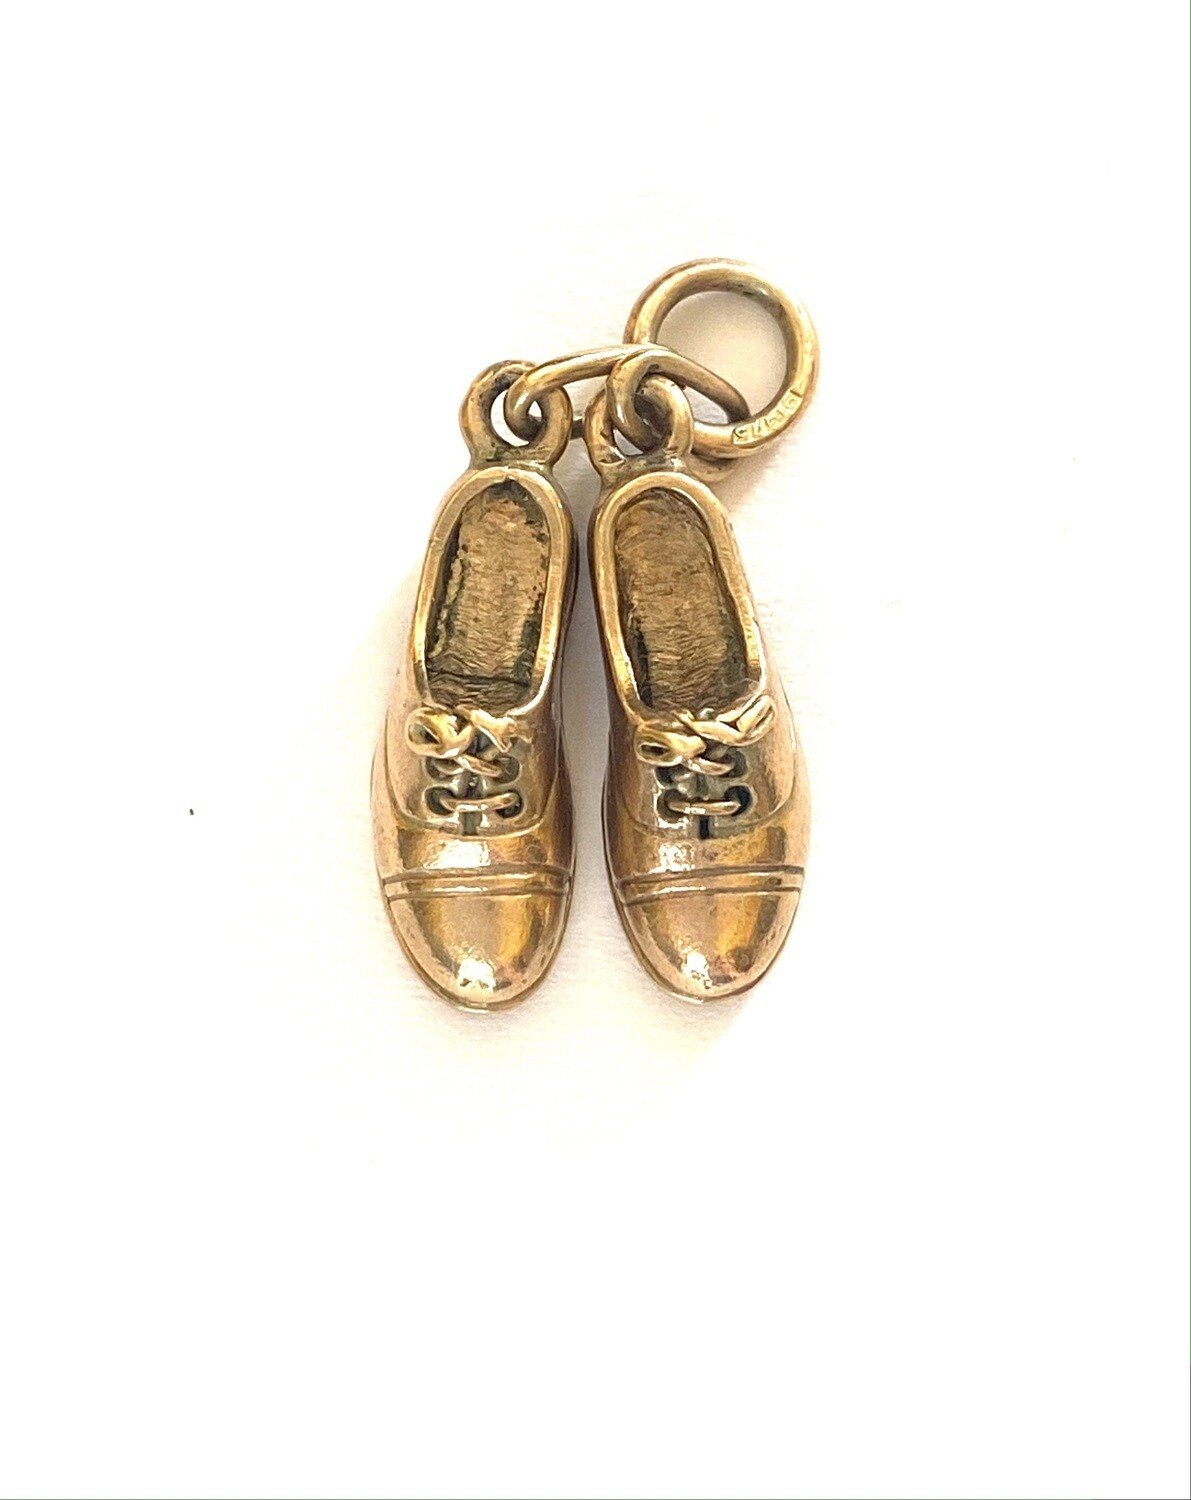 9ct vintage shoes charm / brogues circa chester 1959